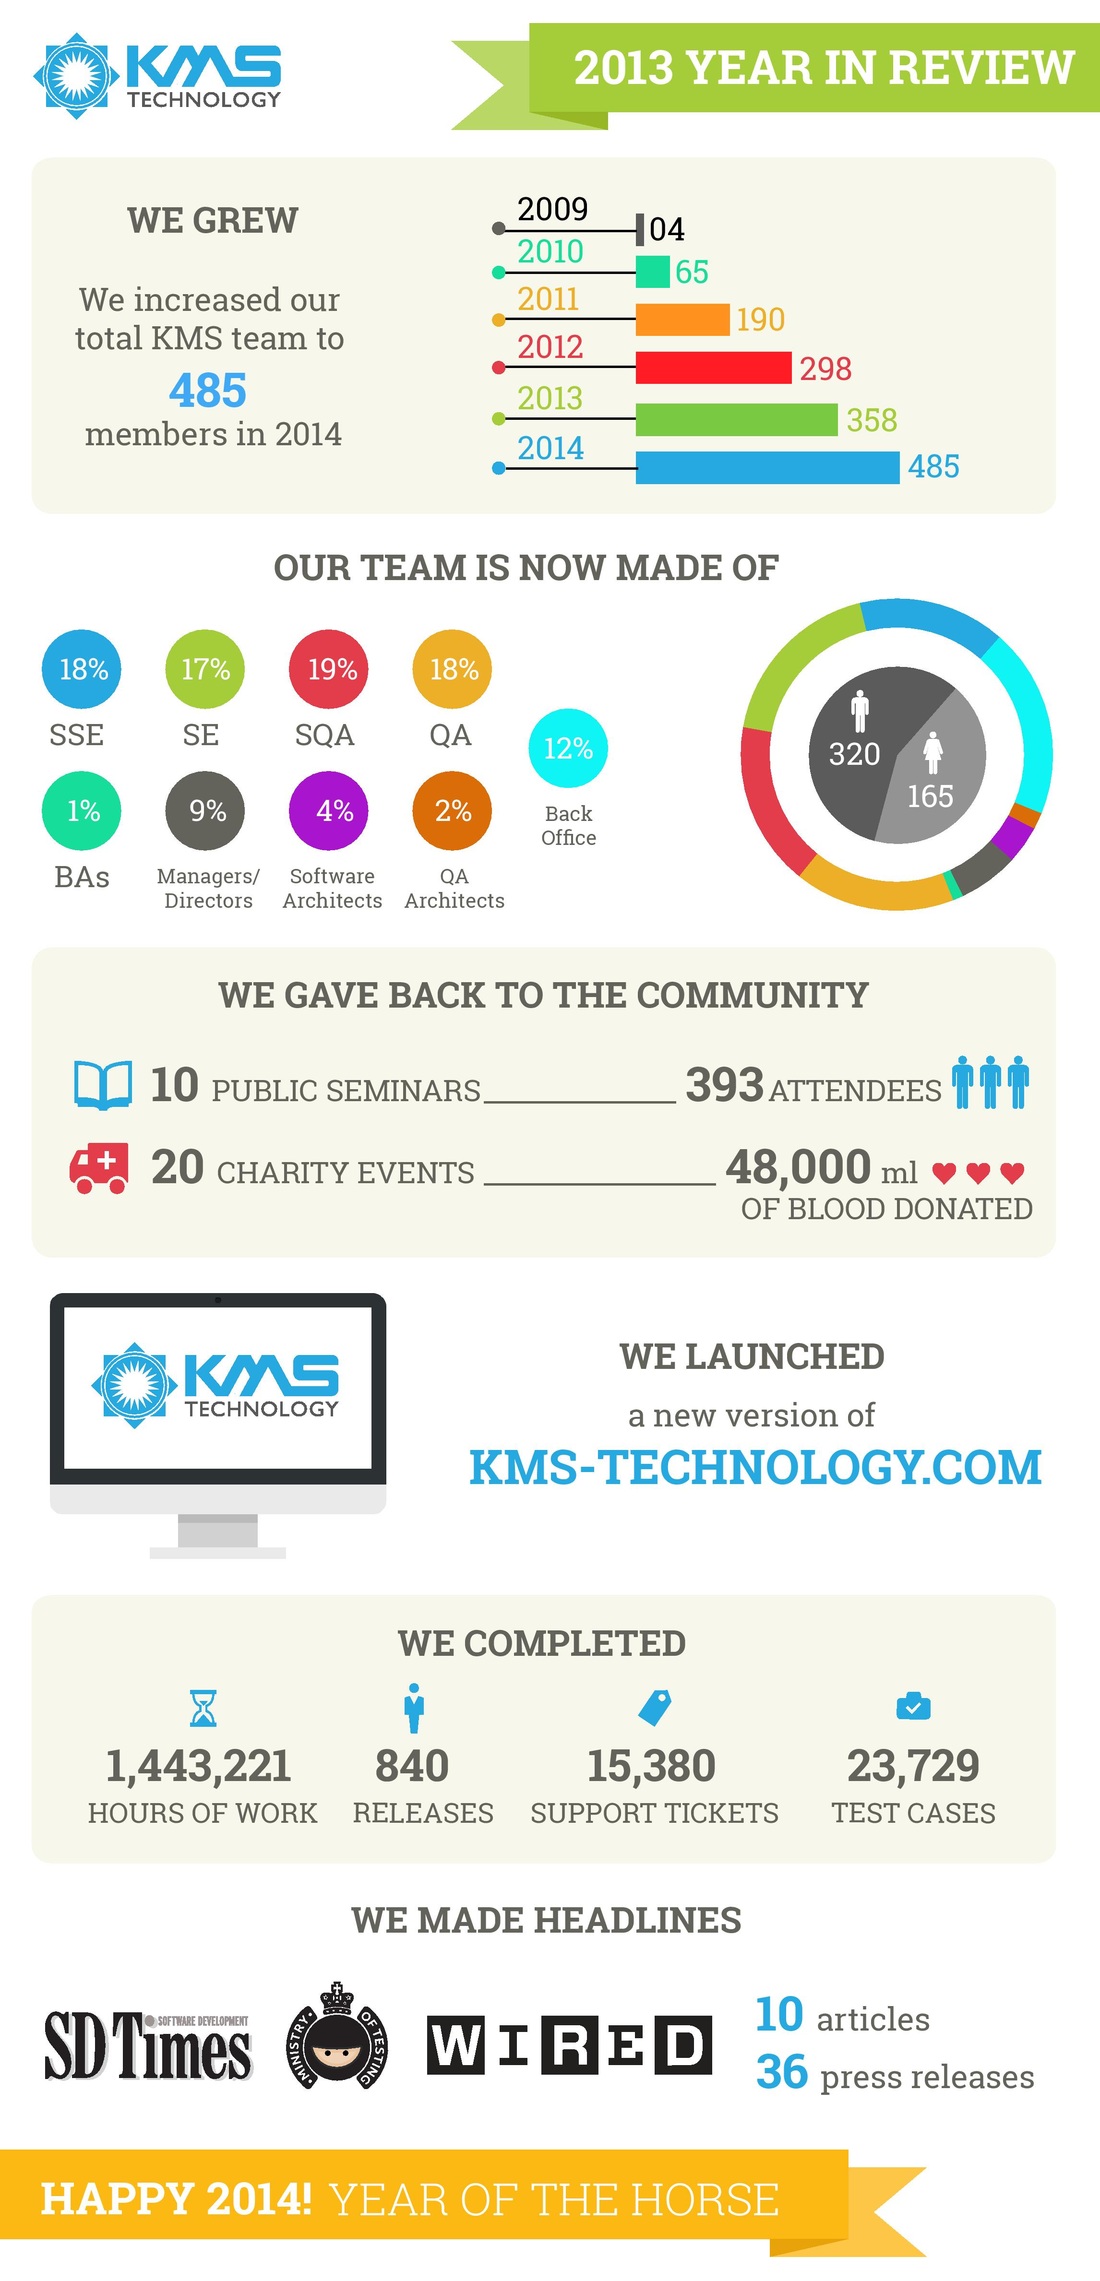 KMS Technology - 2013 Year in Review